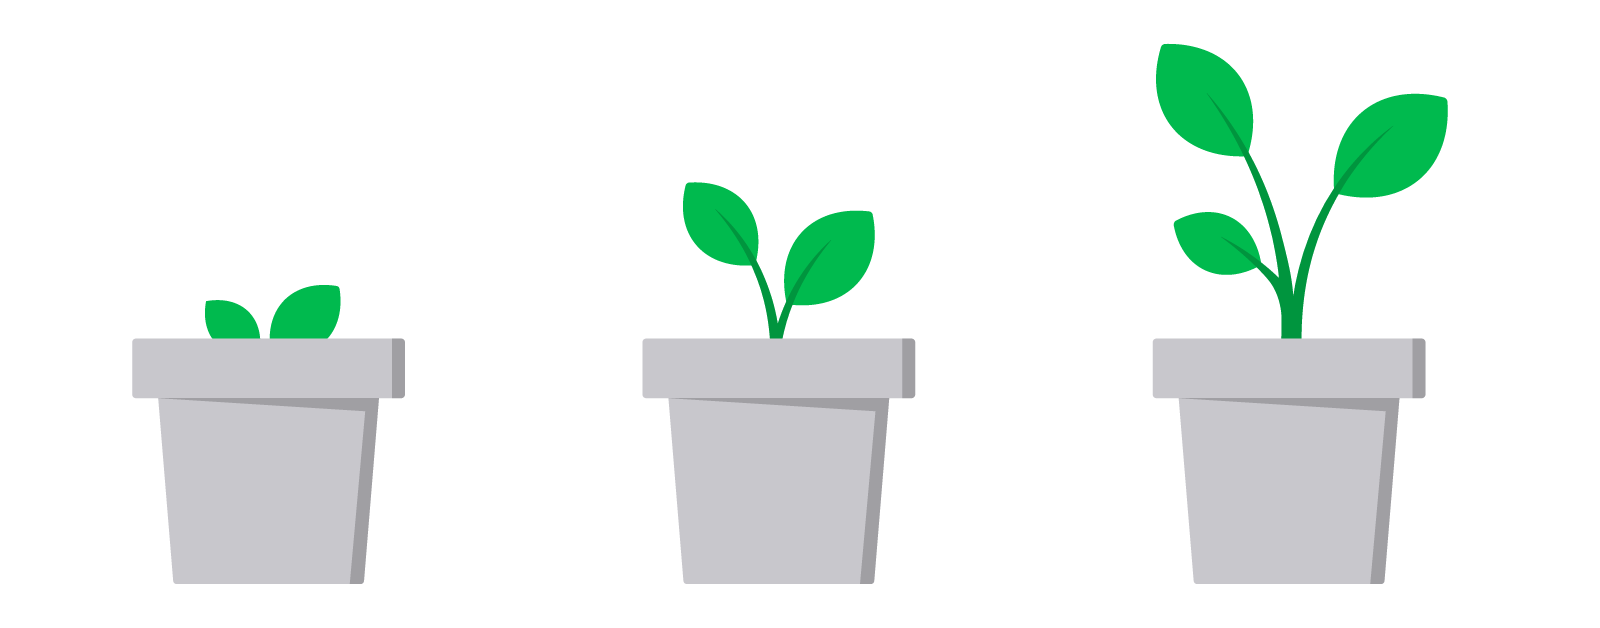 Illustration of a plant growing